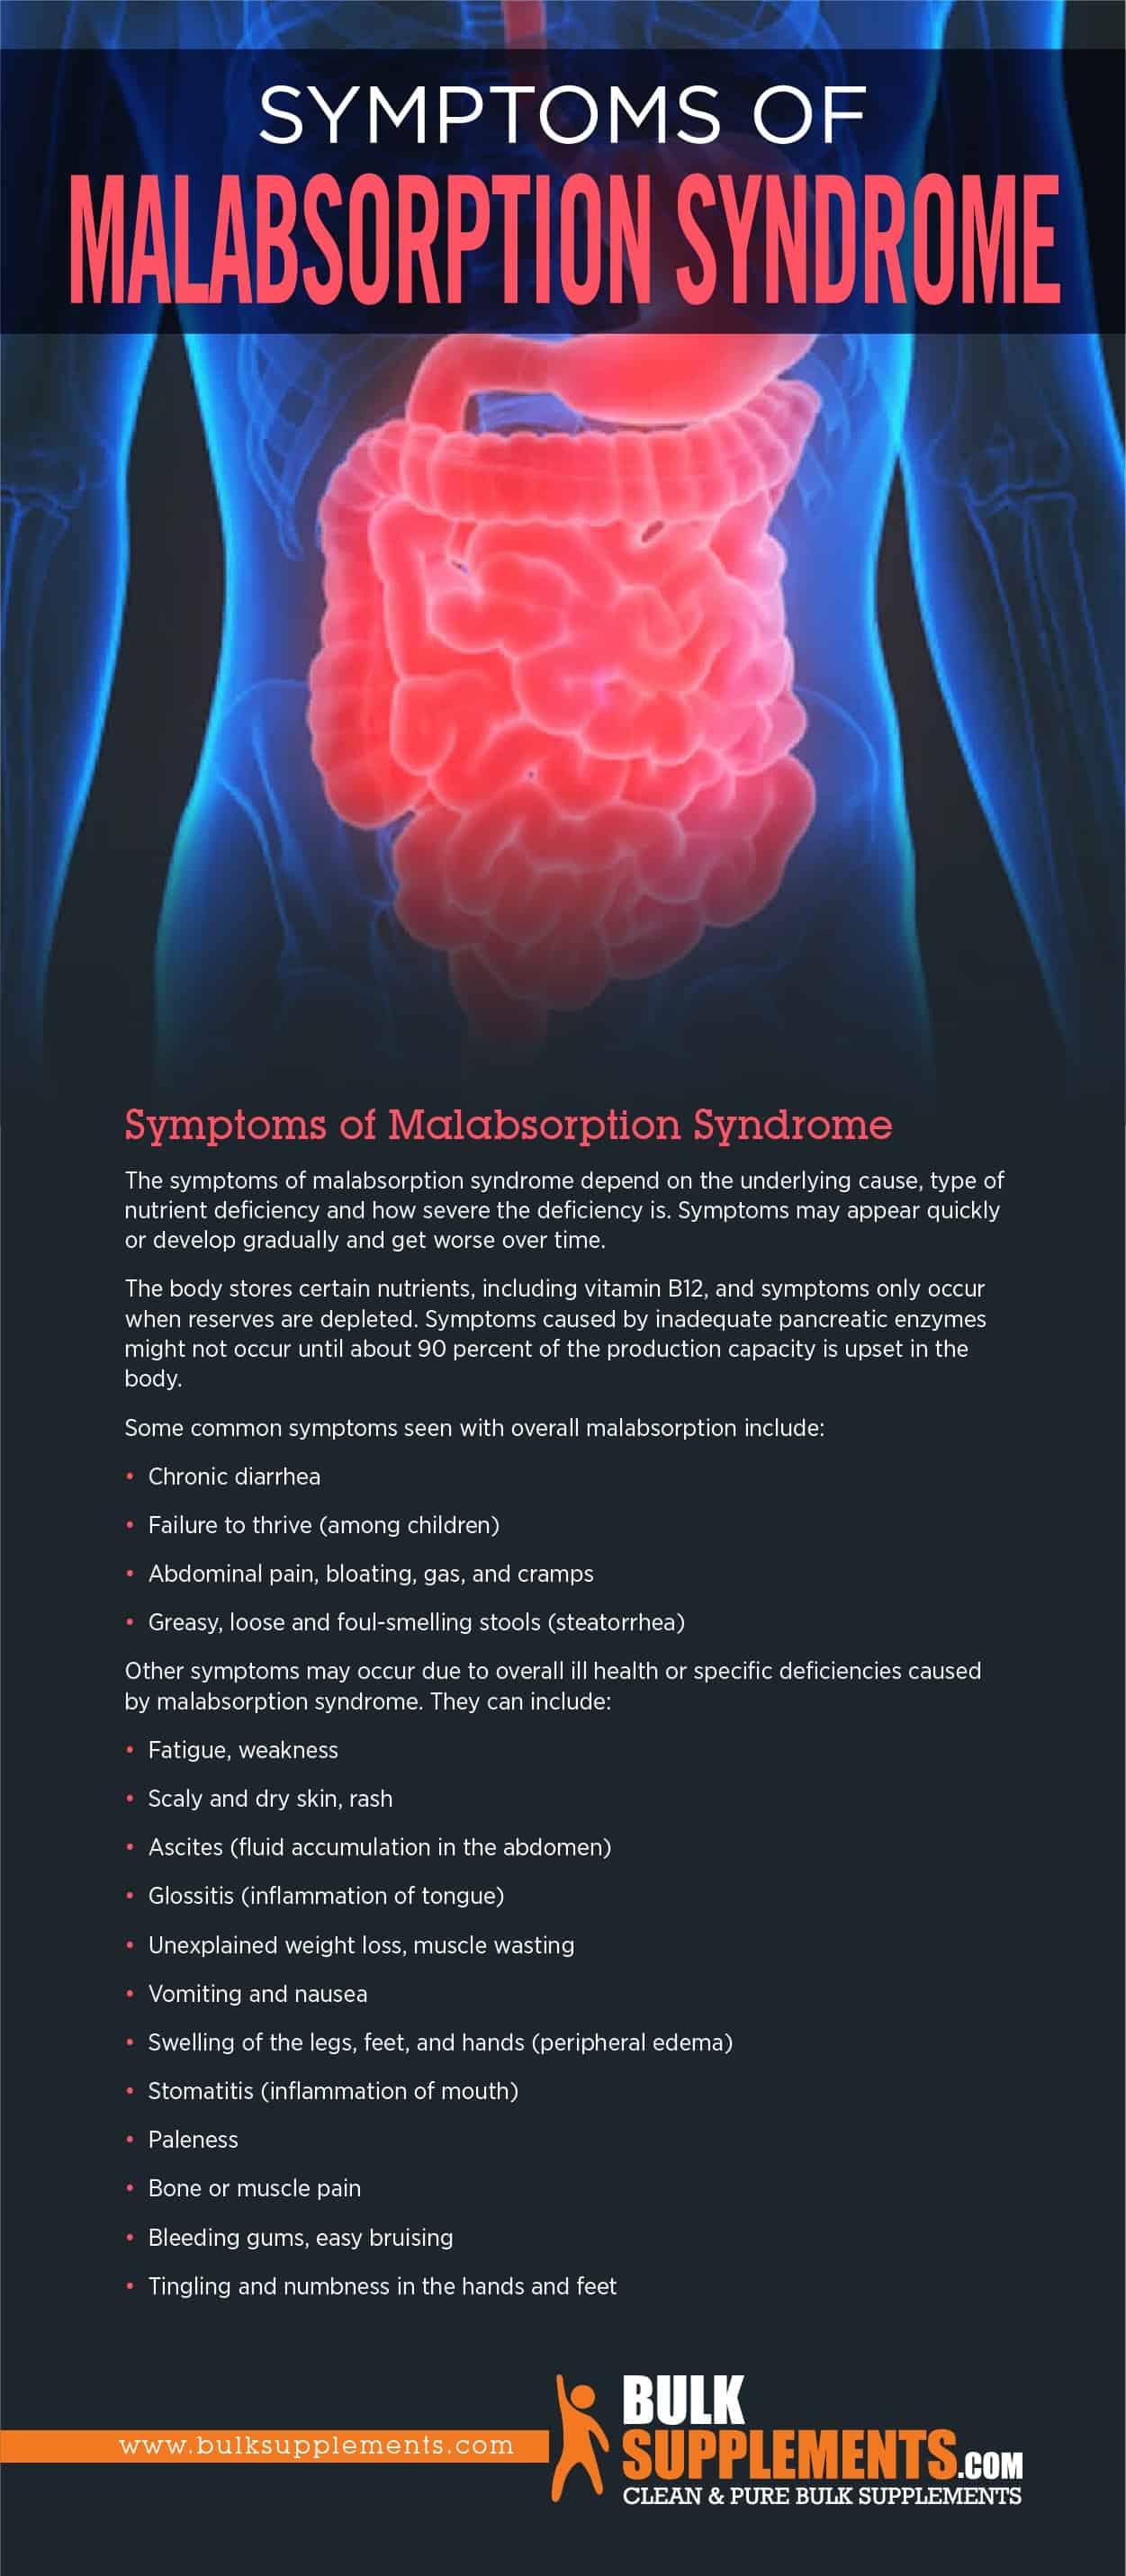 Symptoms of Malabsorption Syndrome